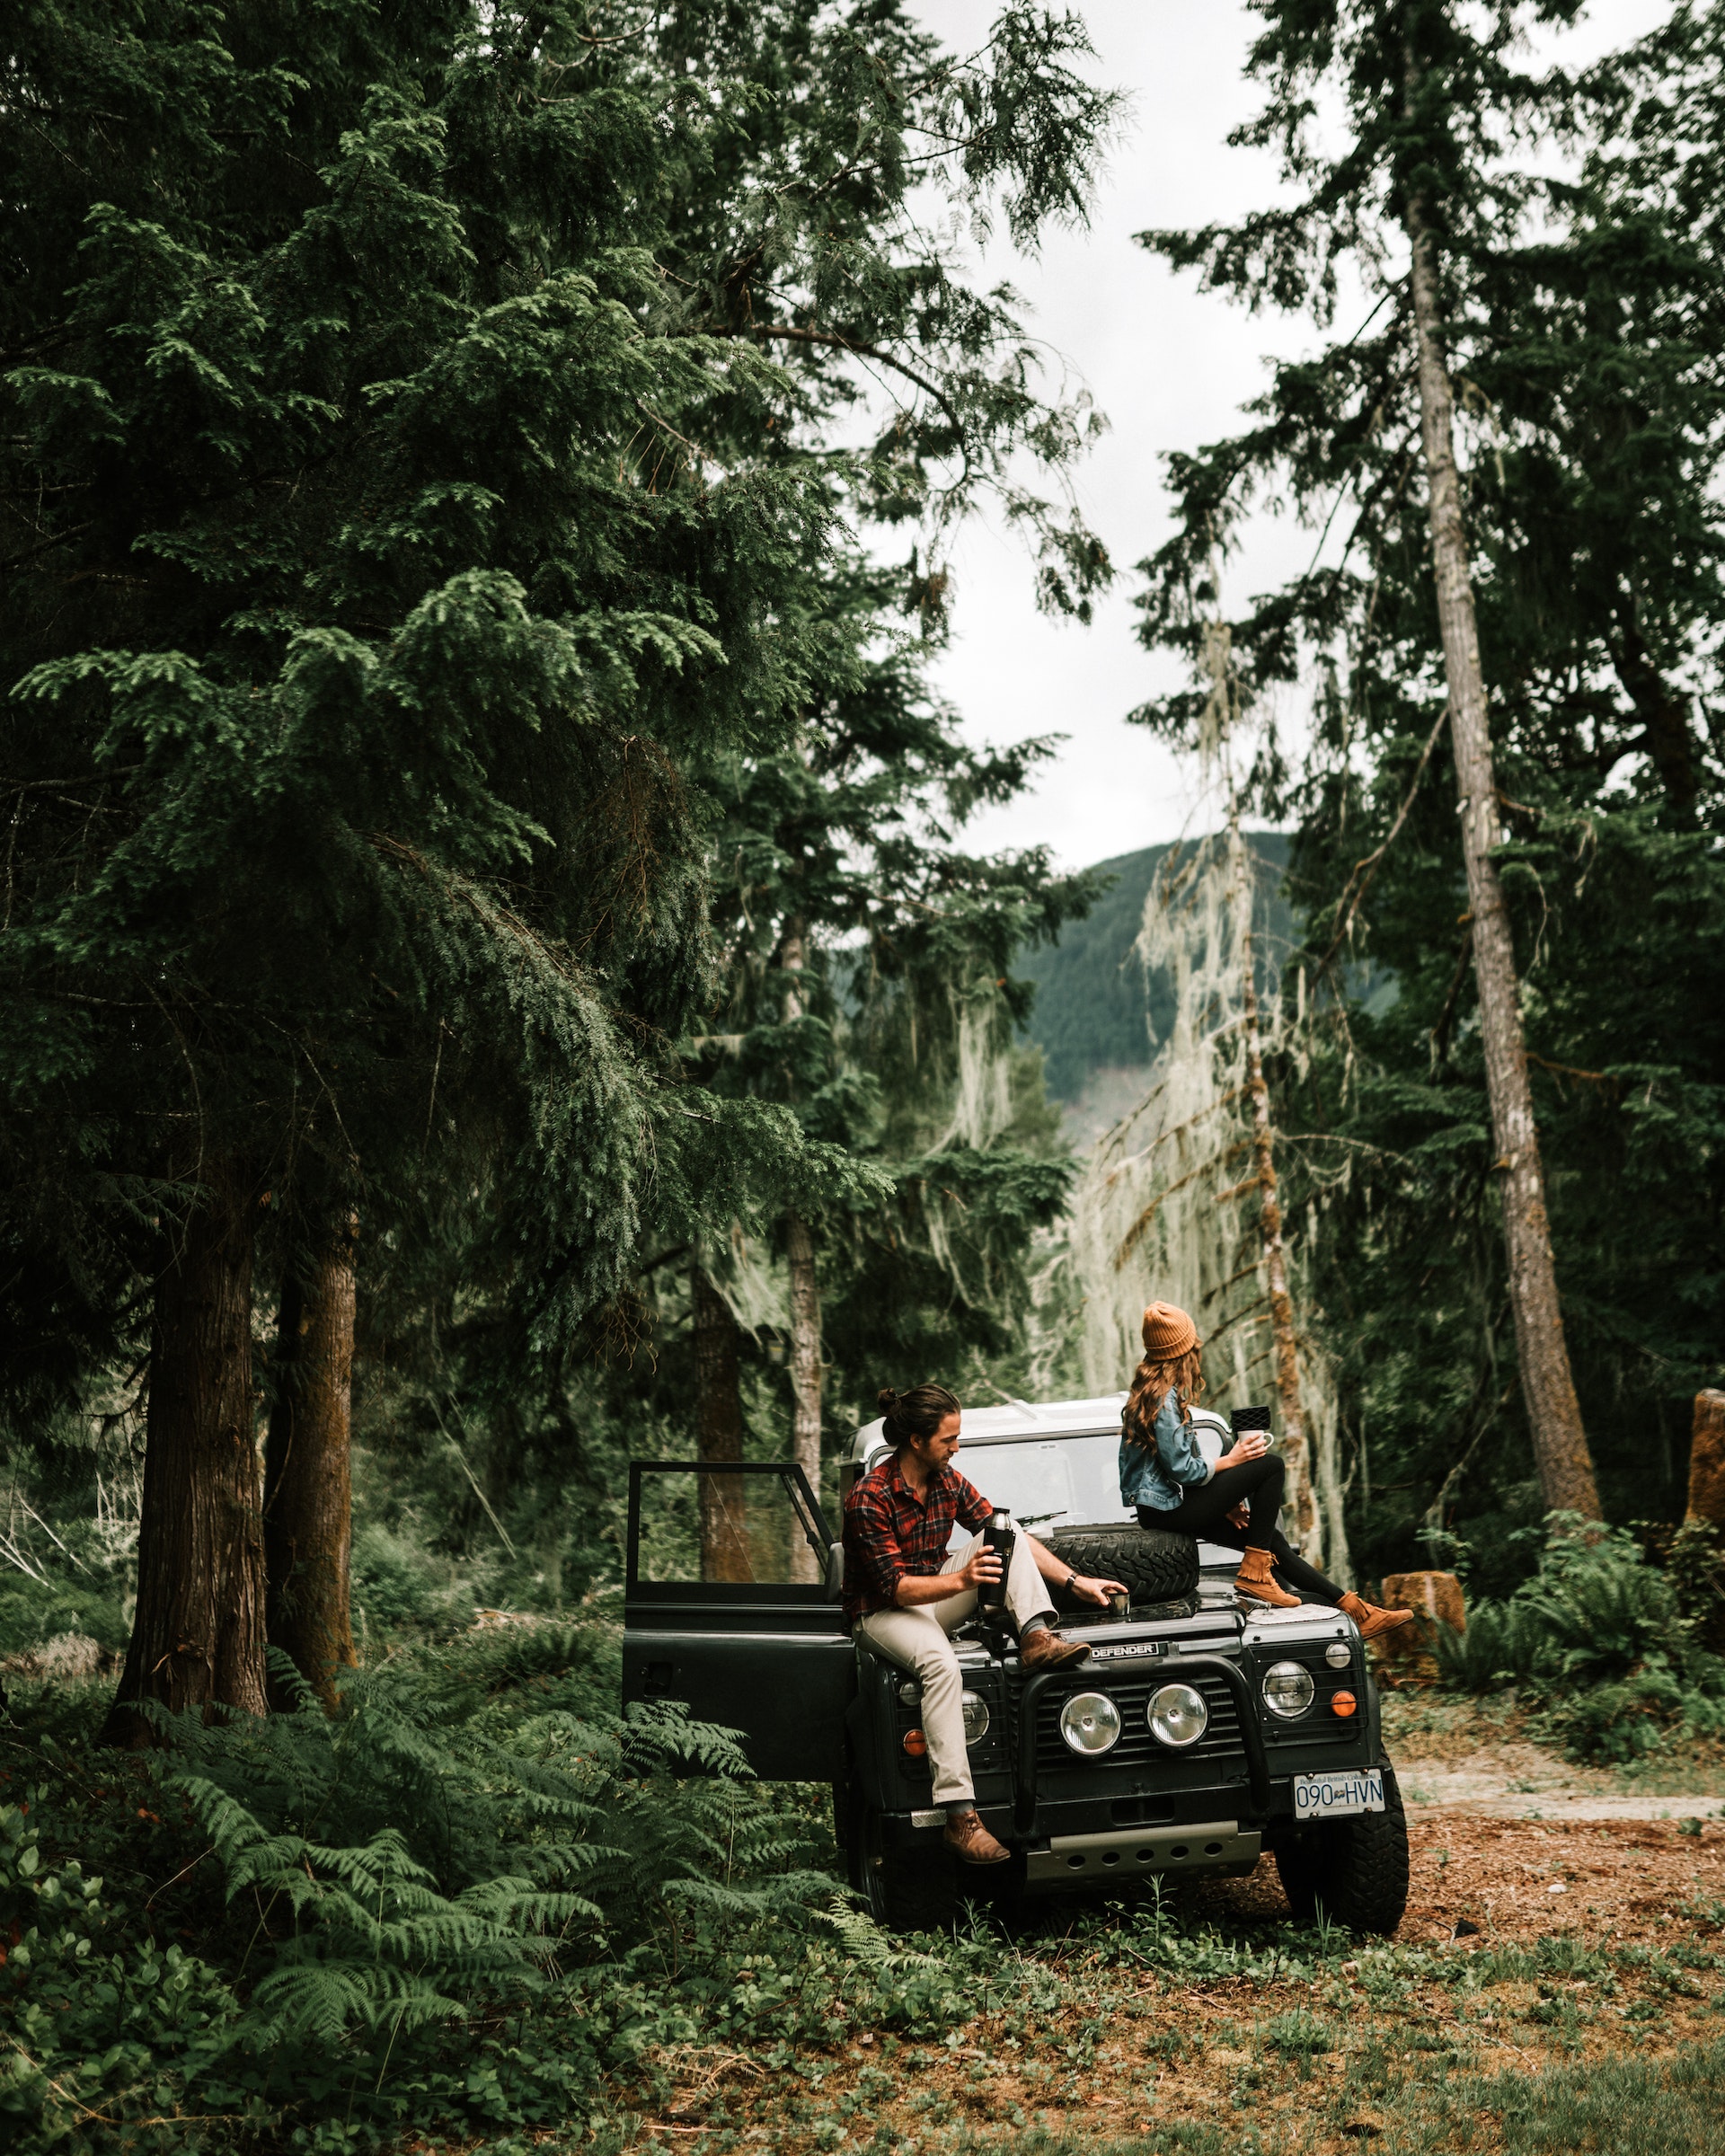 A couple sitting on a jeep in the middle of a forest | Source: Pexels